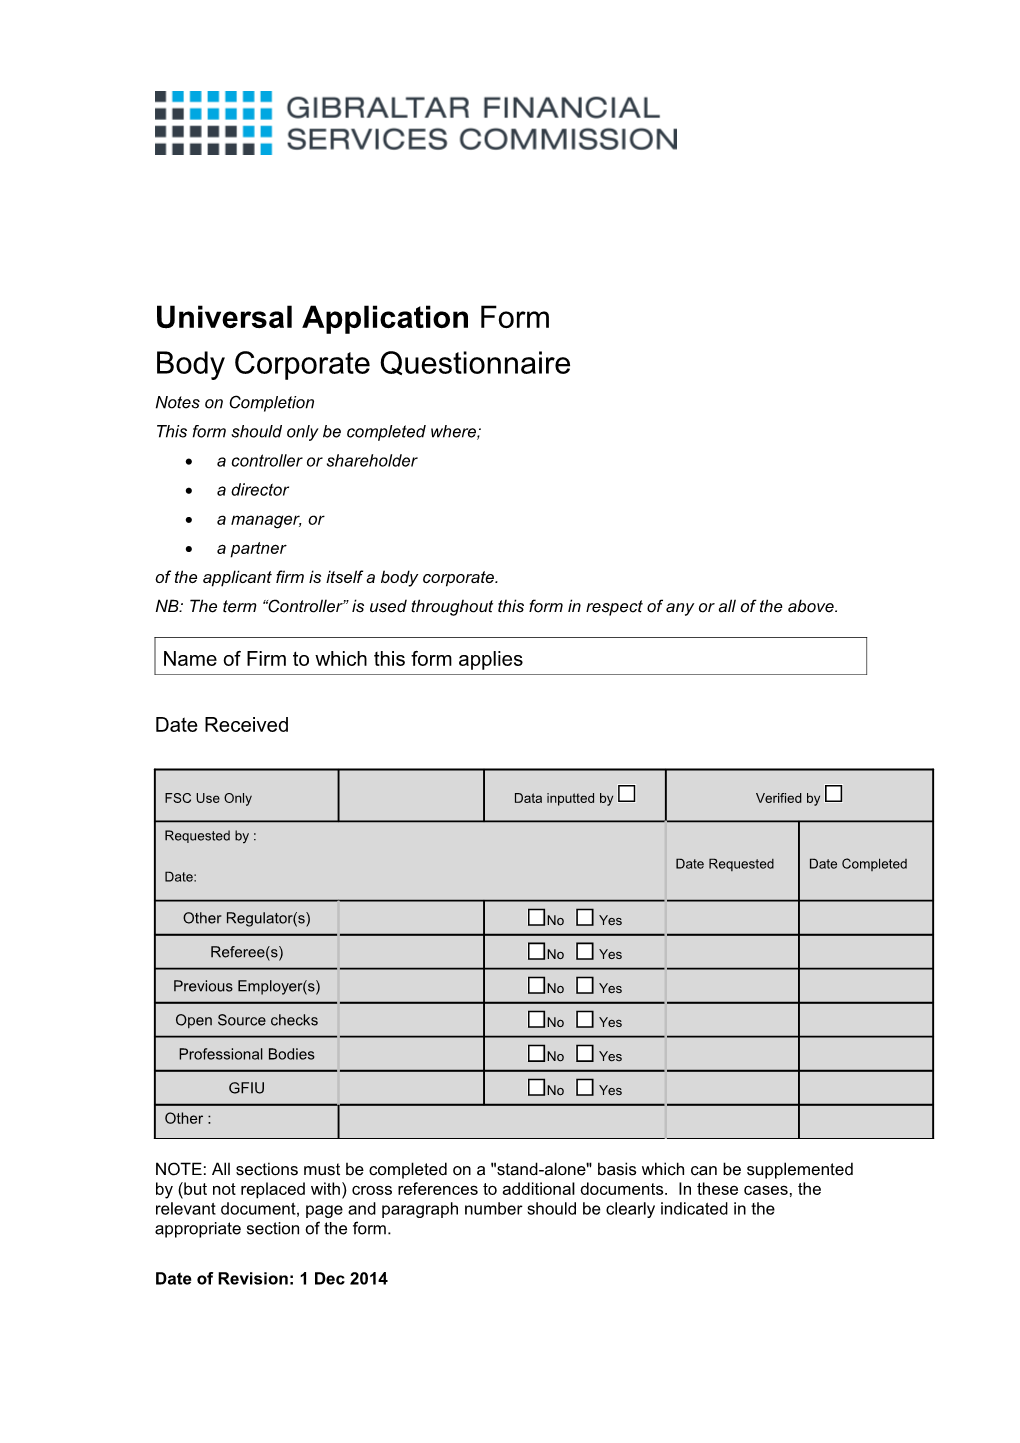 Universal Application Form for Financial Services Authorisation